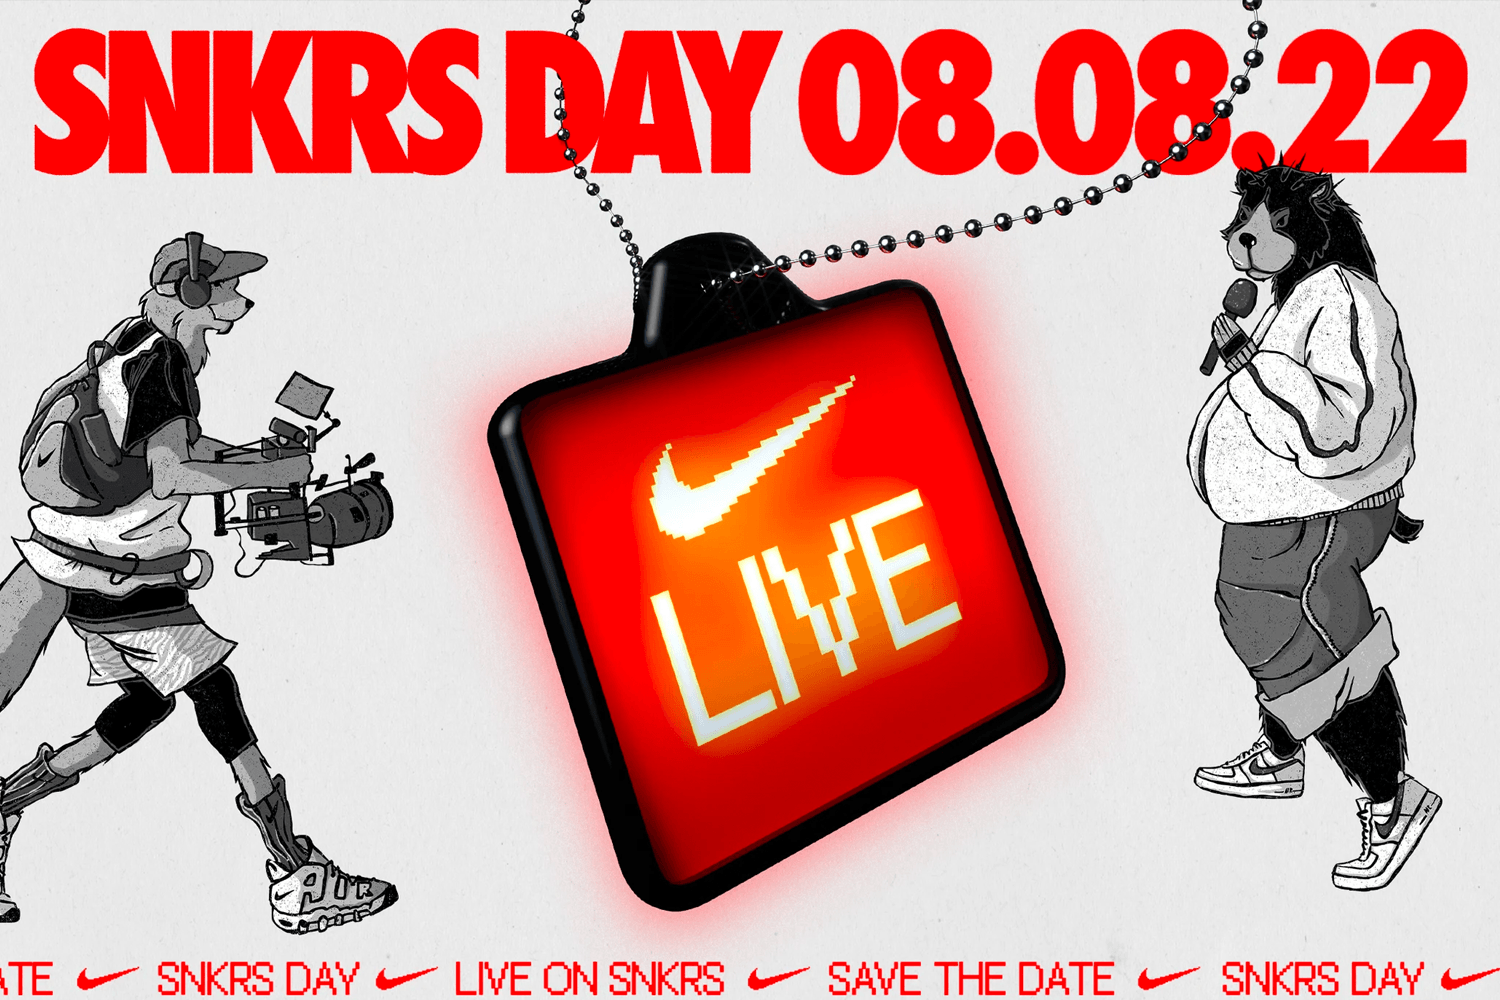 First release during Nike SNKRS Day announced Sneakerjagers